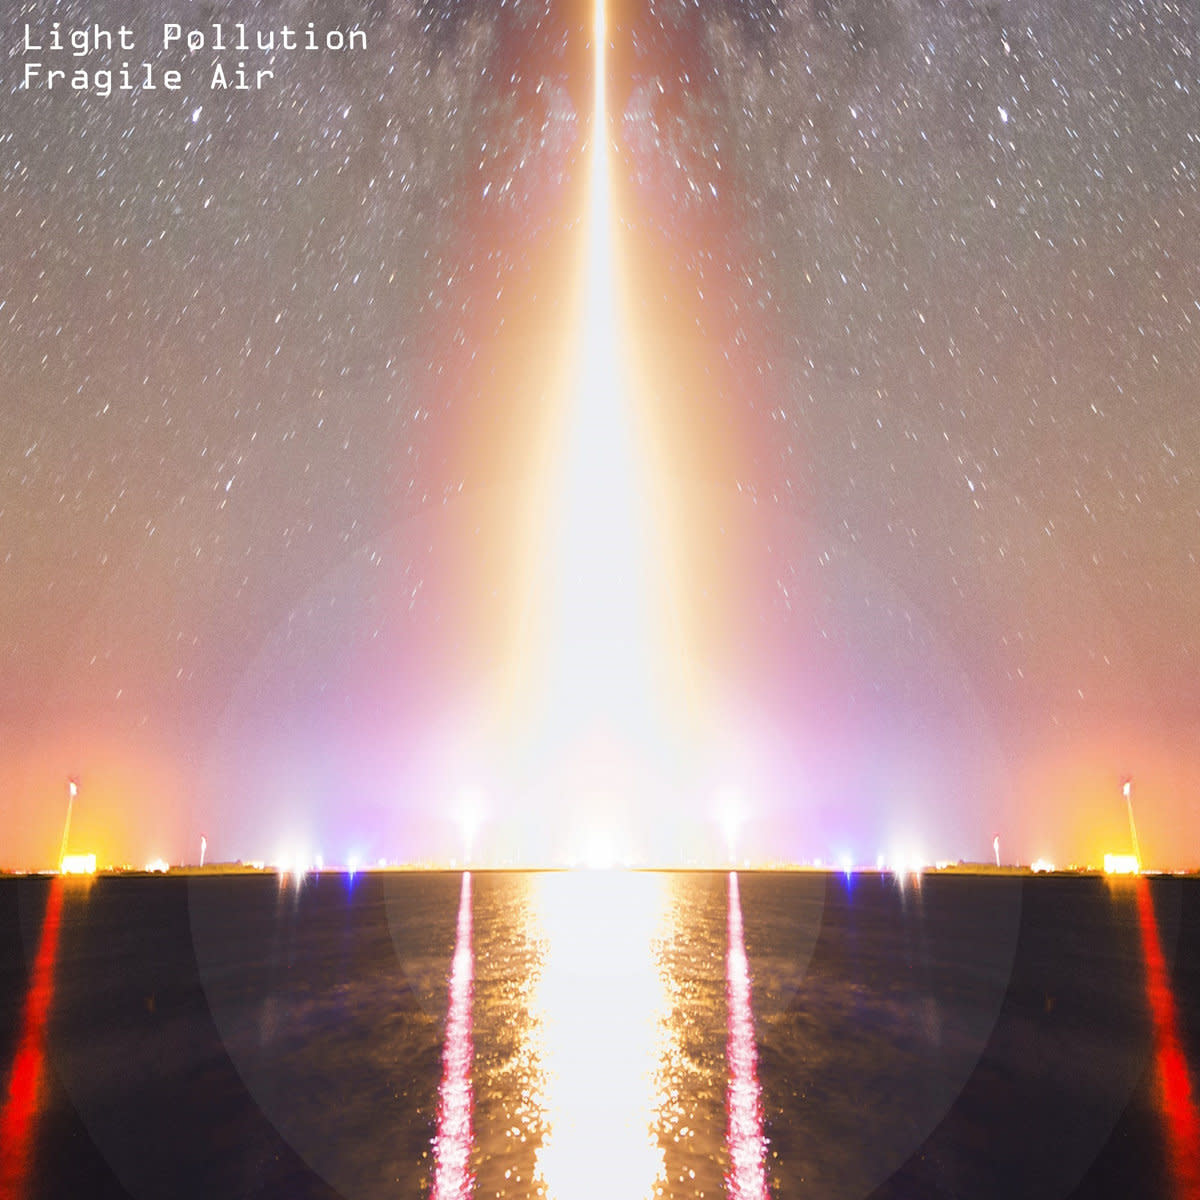 synth-album-review-light-pollution-by-fragile-air